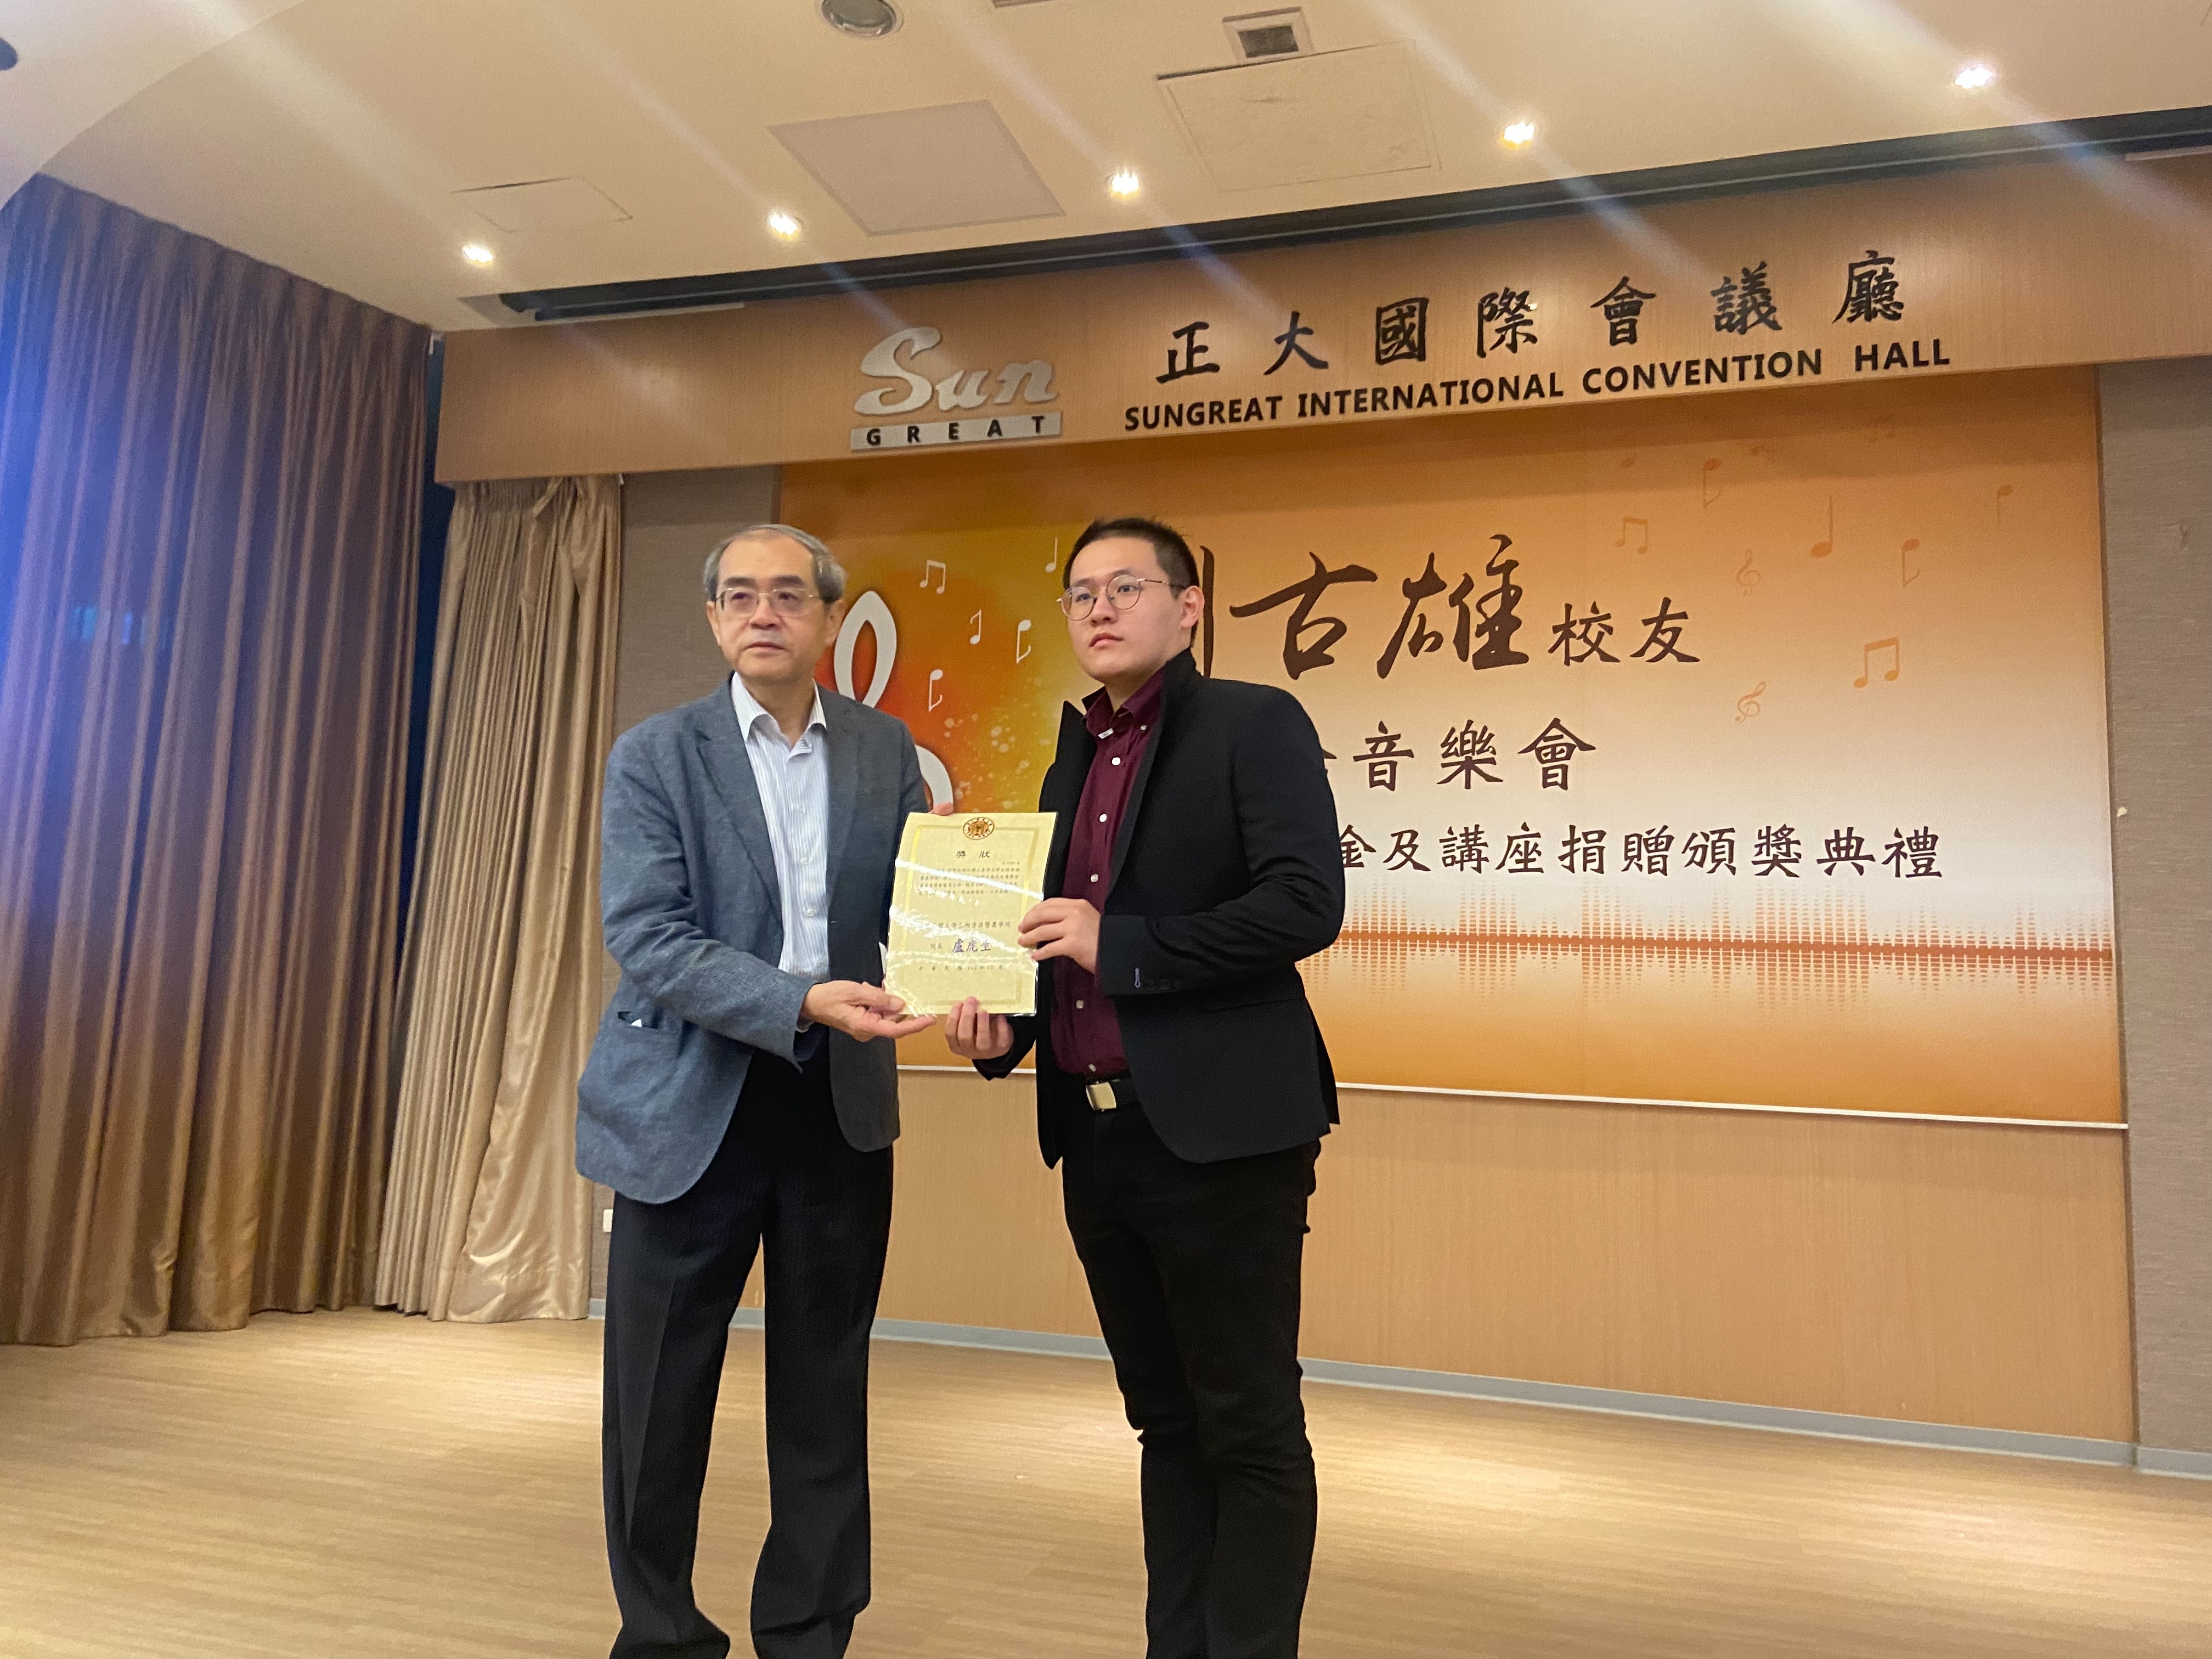 Congratulation to Hung-Cheng for the 2021 LKS Scholarship